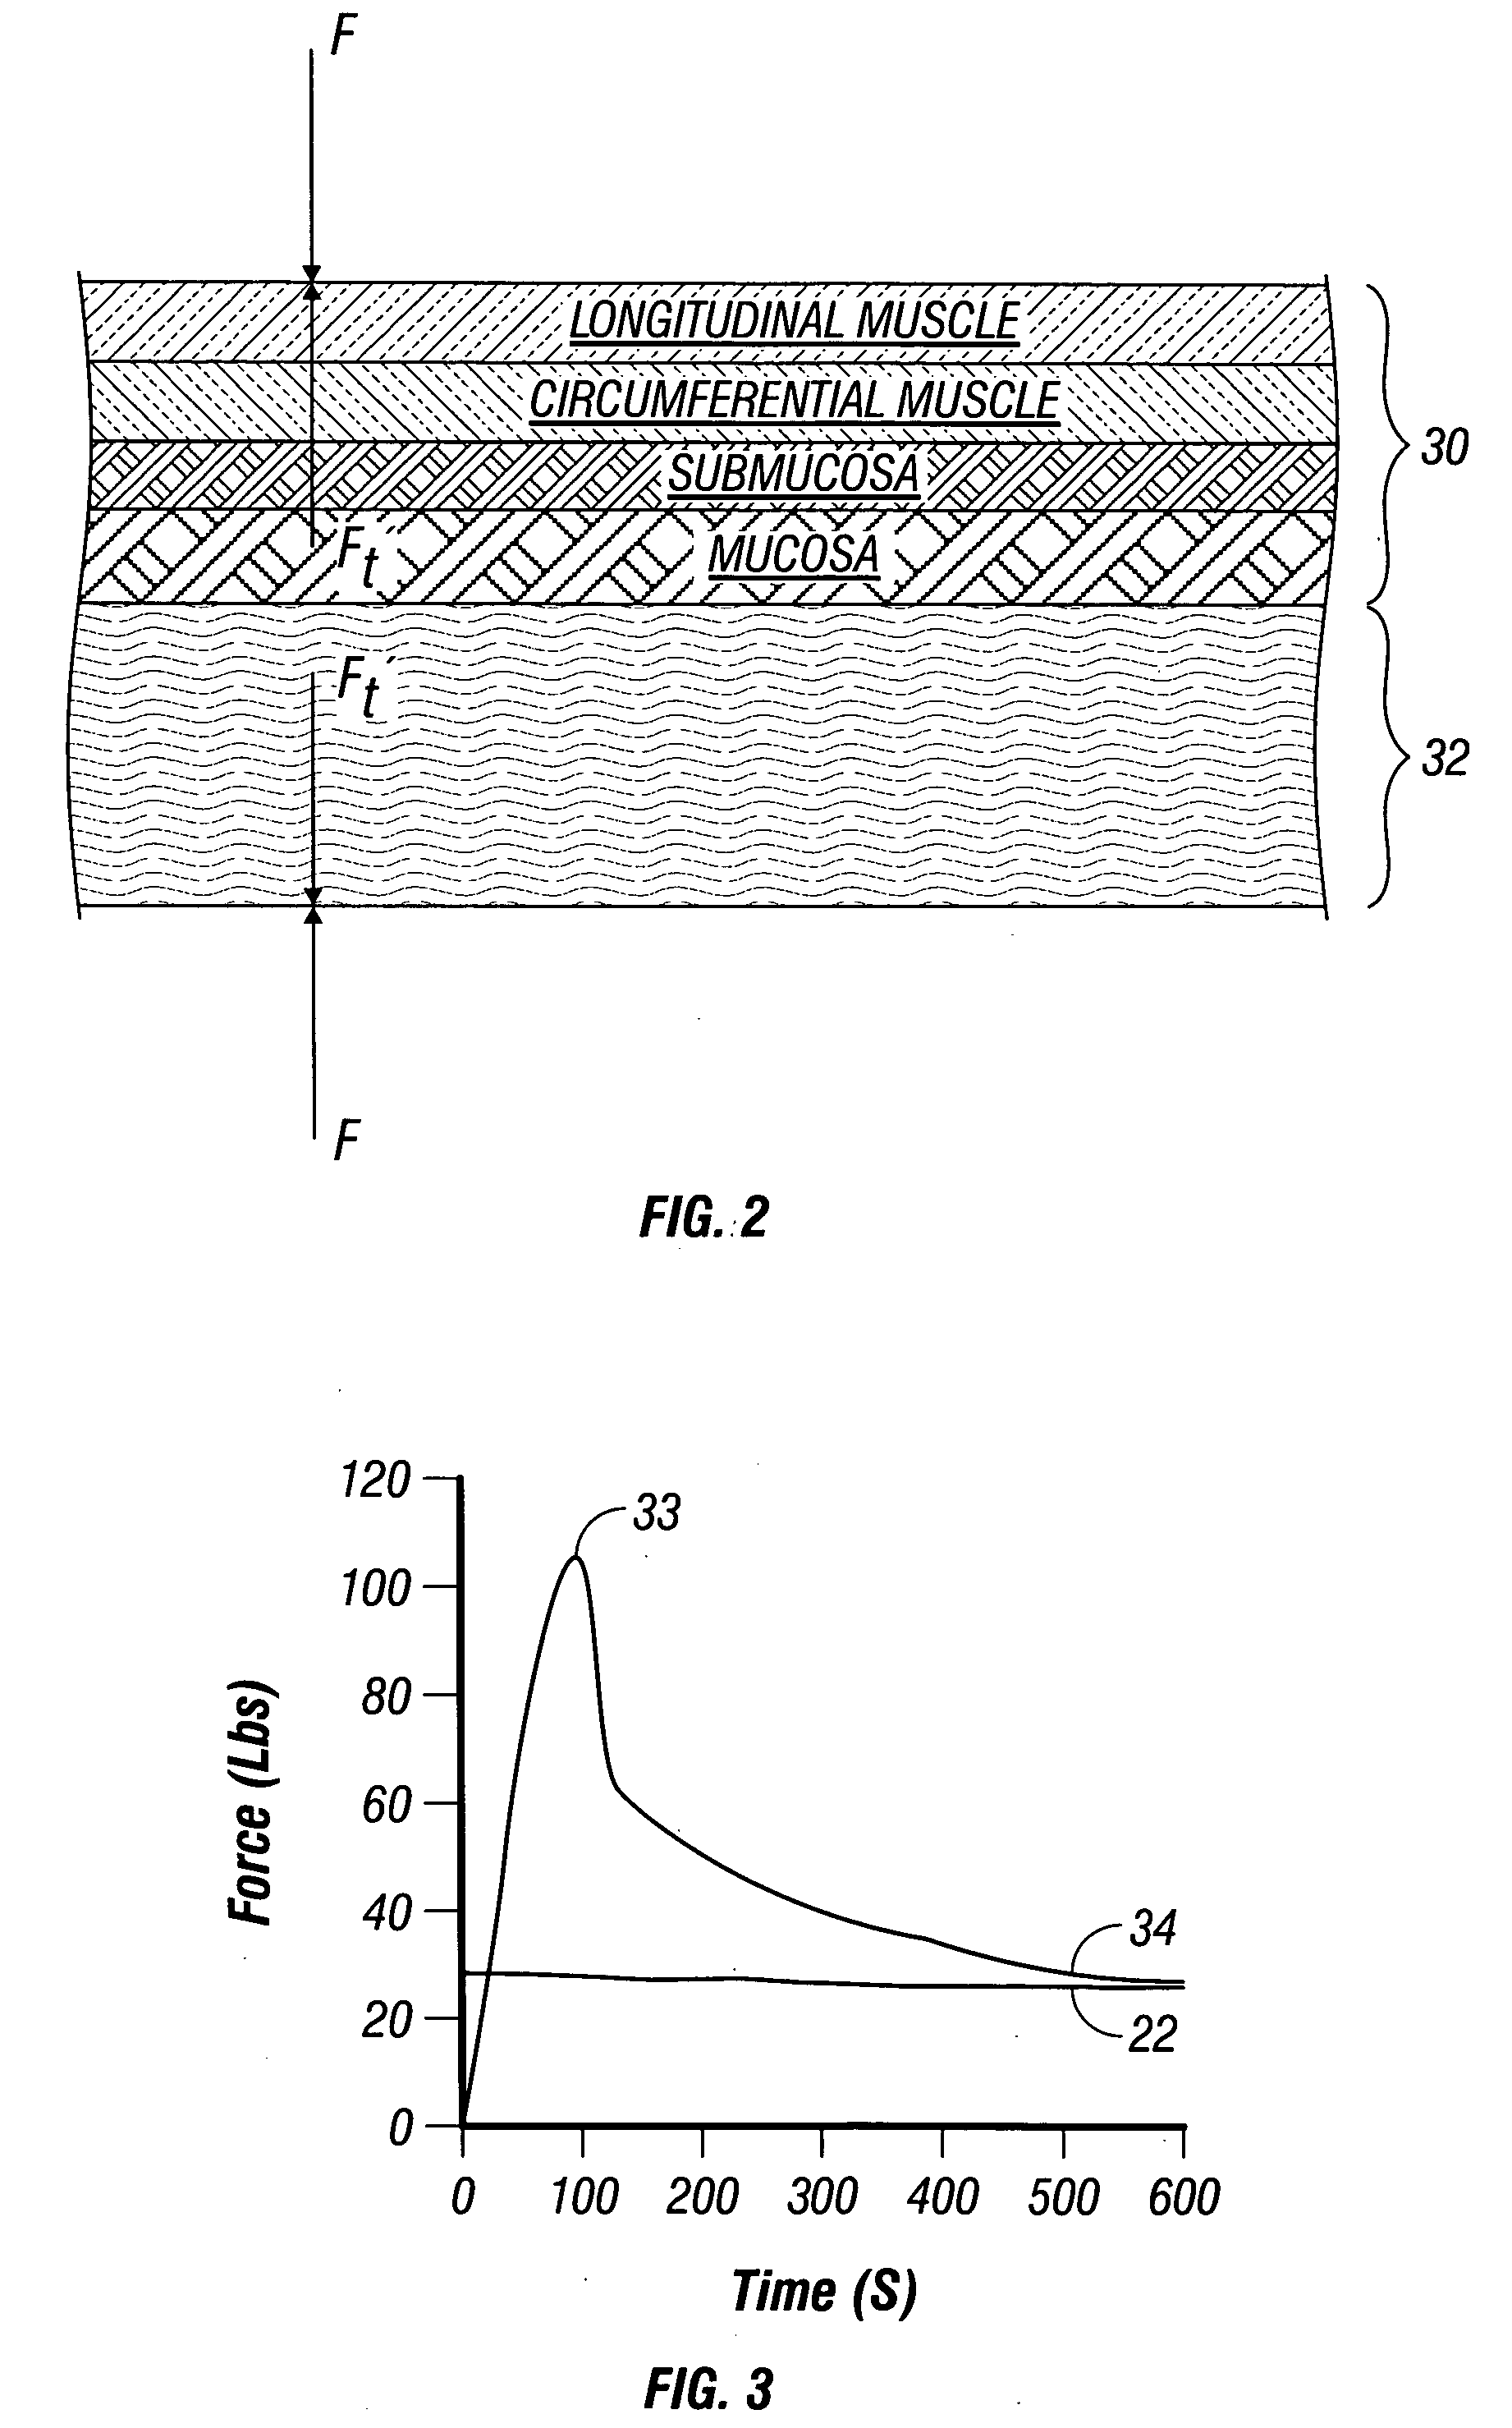 Method and system to determine an optimal tissue compression time to implant a surgical element